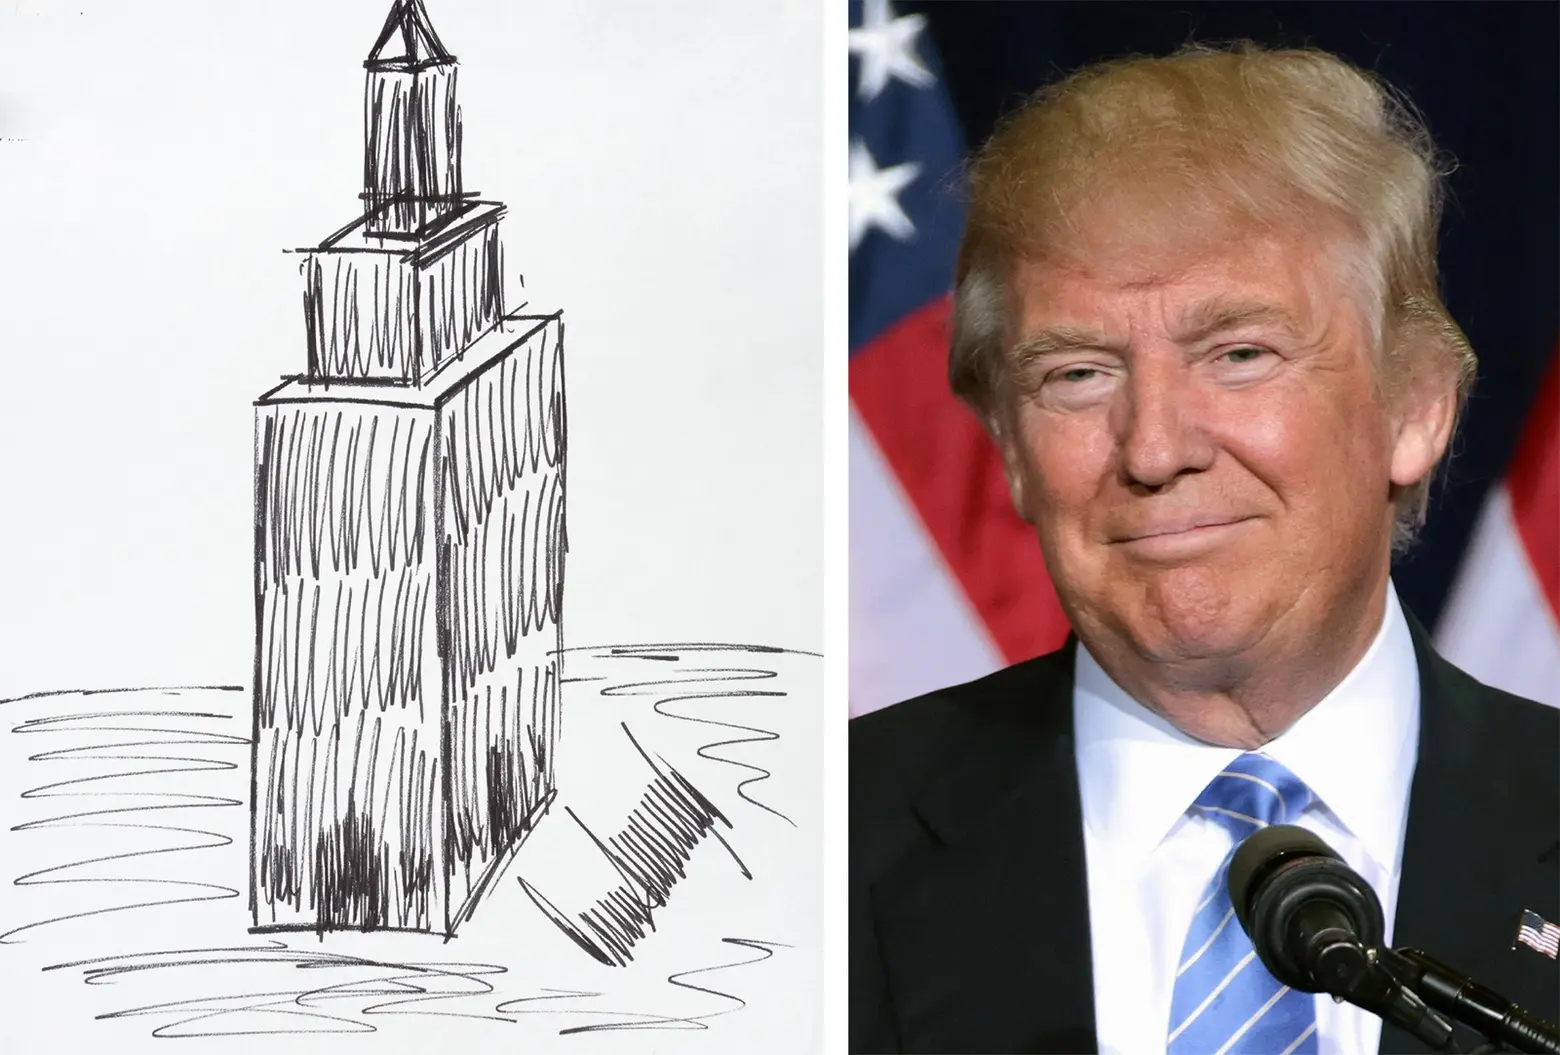 Donald Trump’s Empire State Building doodle expected to fetch $12,000 at auction